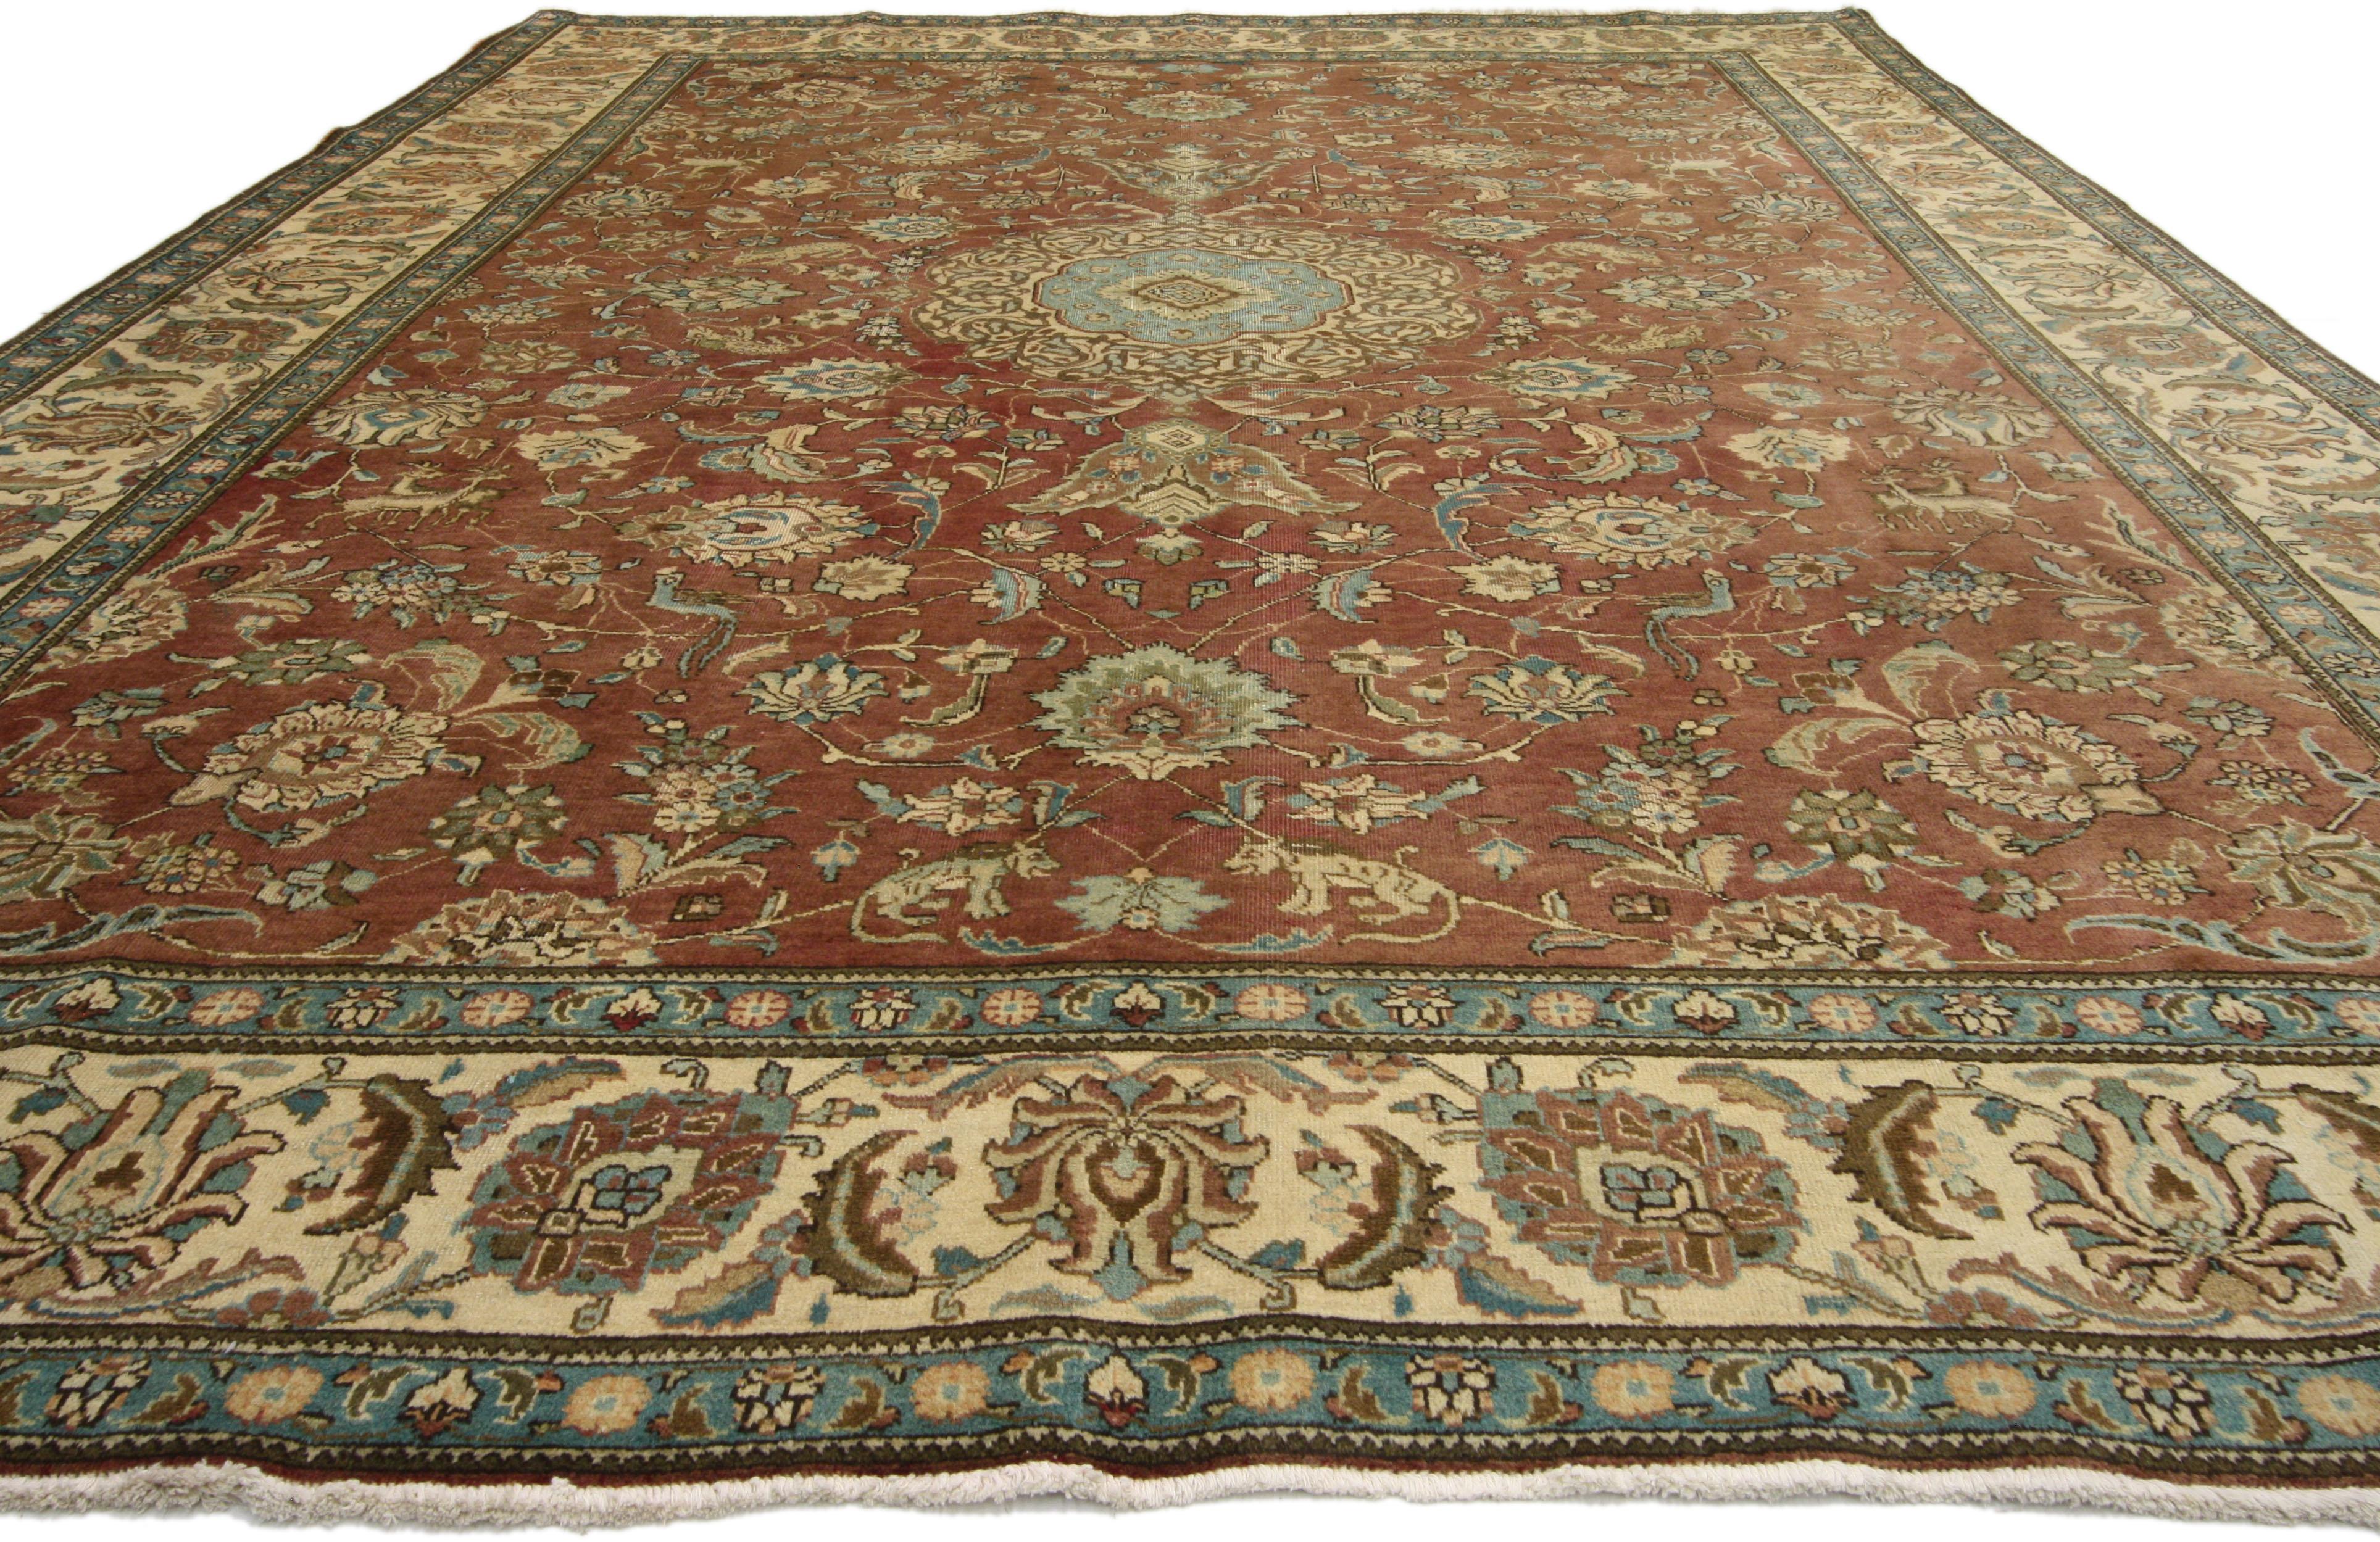 76286, vintage Persian Tabriz gallery rug with hunting scene and medieval style. This hand-knotted wool vintage Persian Tabriz rug features an eight-point cusped central medallion outlined in filigree edging among an inconspicuous hunting scene